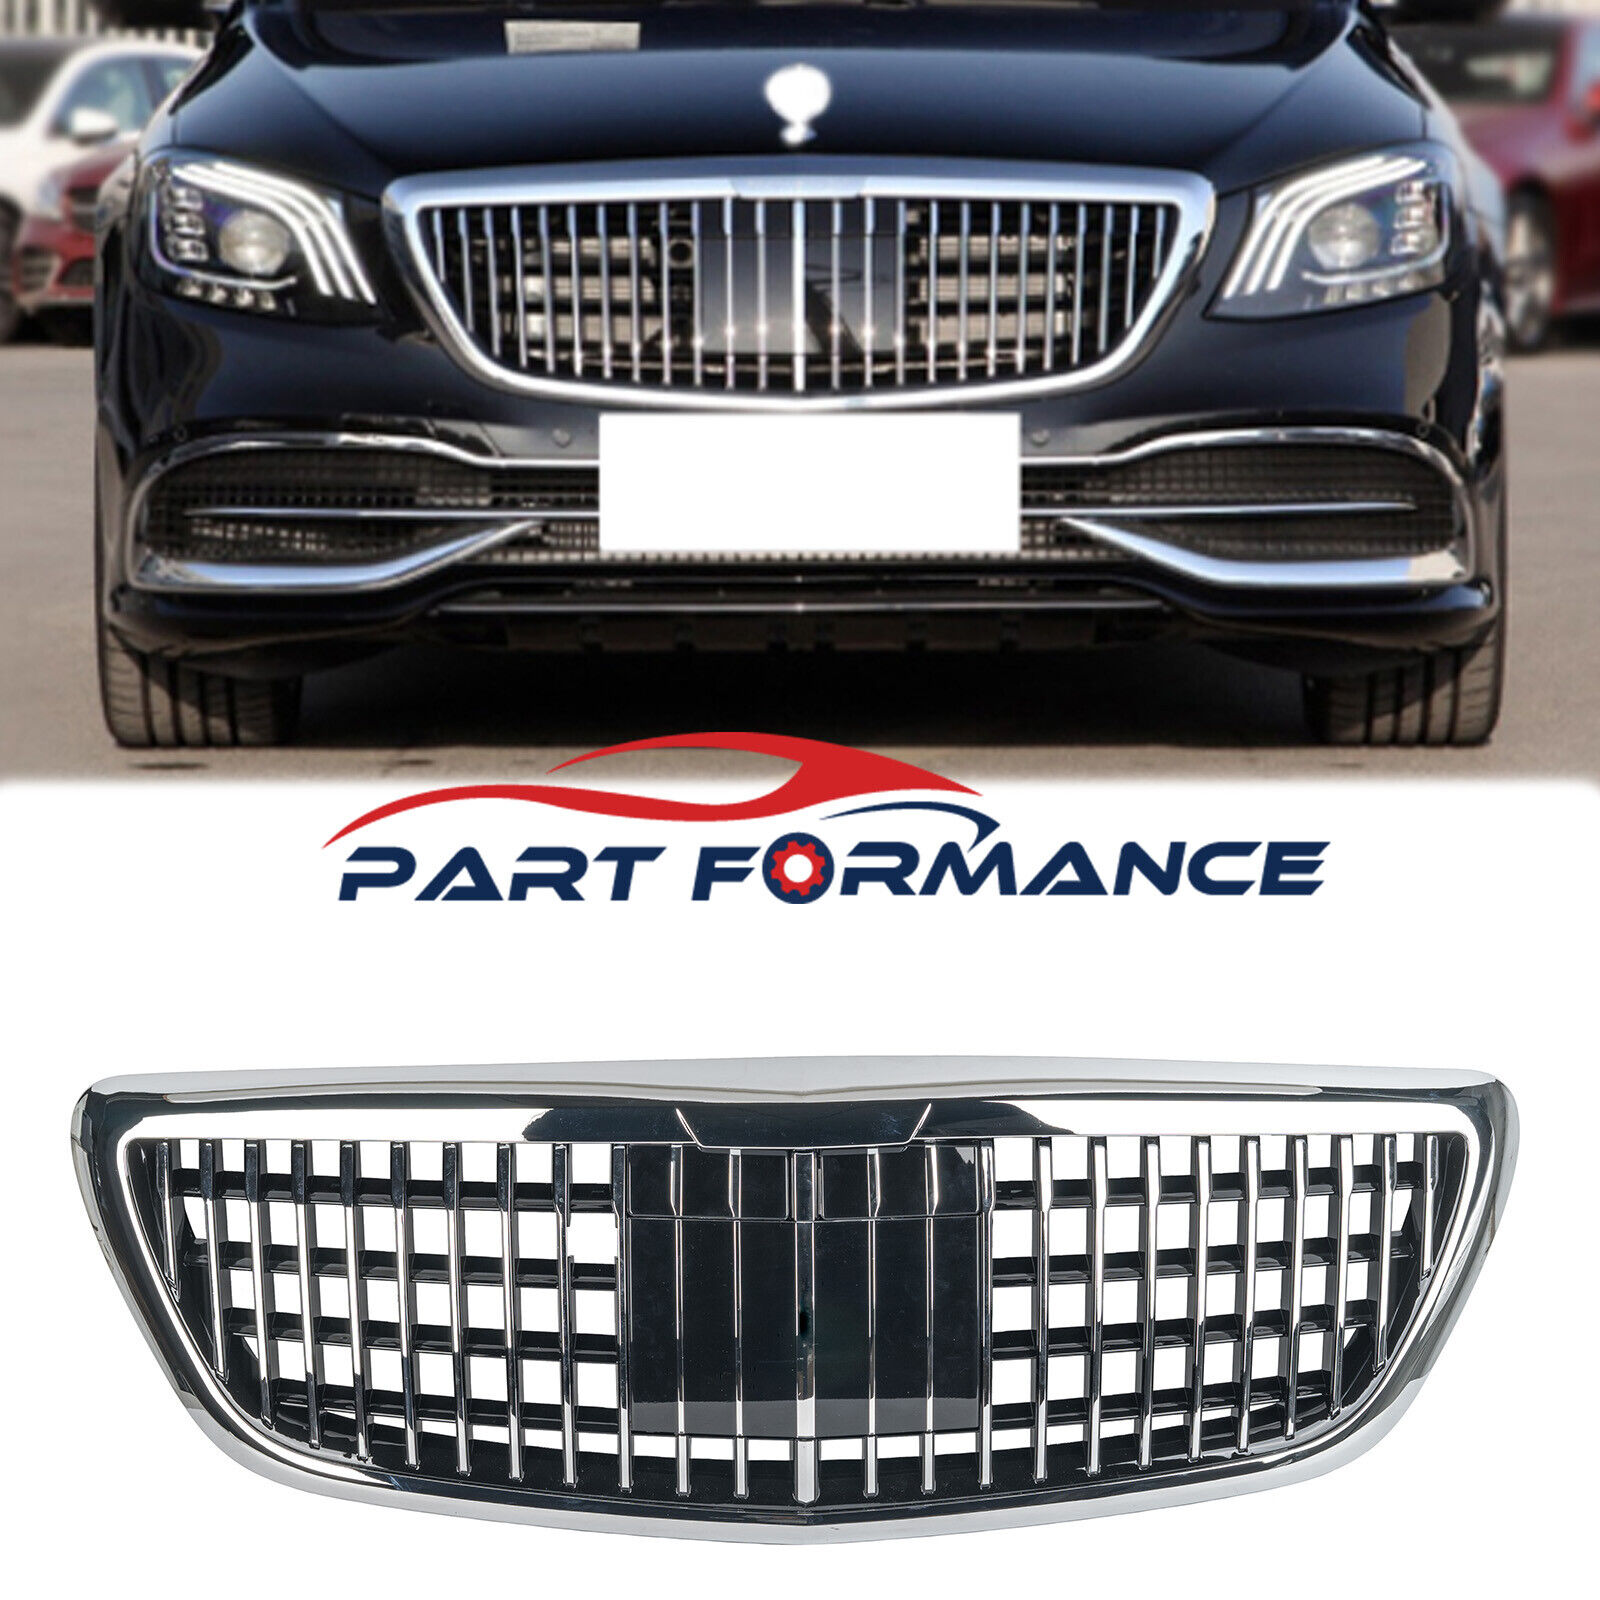 Chrome Front Grille Maybach Style For Mercedes S class W222 Sedan S550 2014-2020